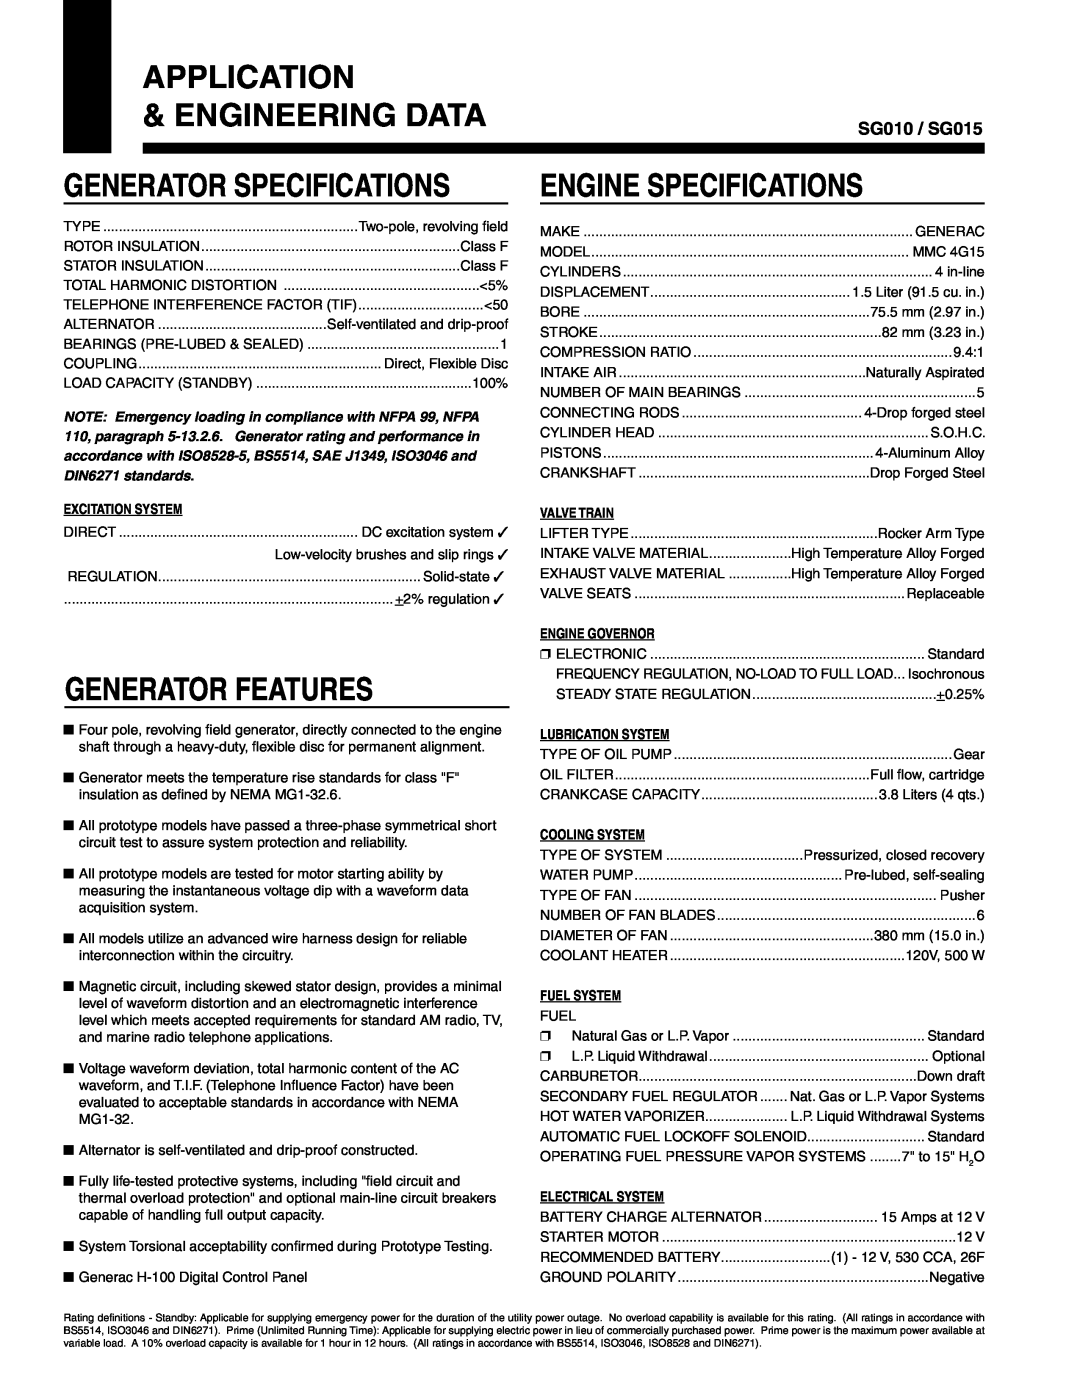 Generac Power Systems manual Application, Engineering Data, Generator Specifications, Generator Features, SG010 / SG015 